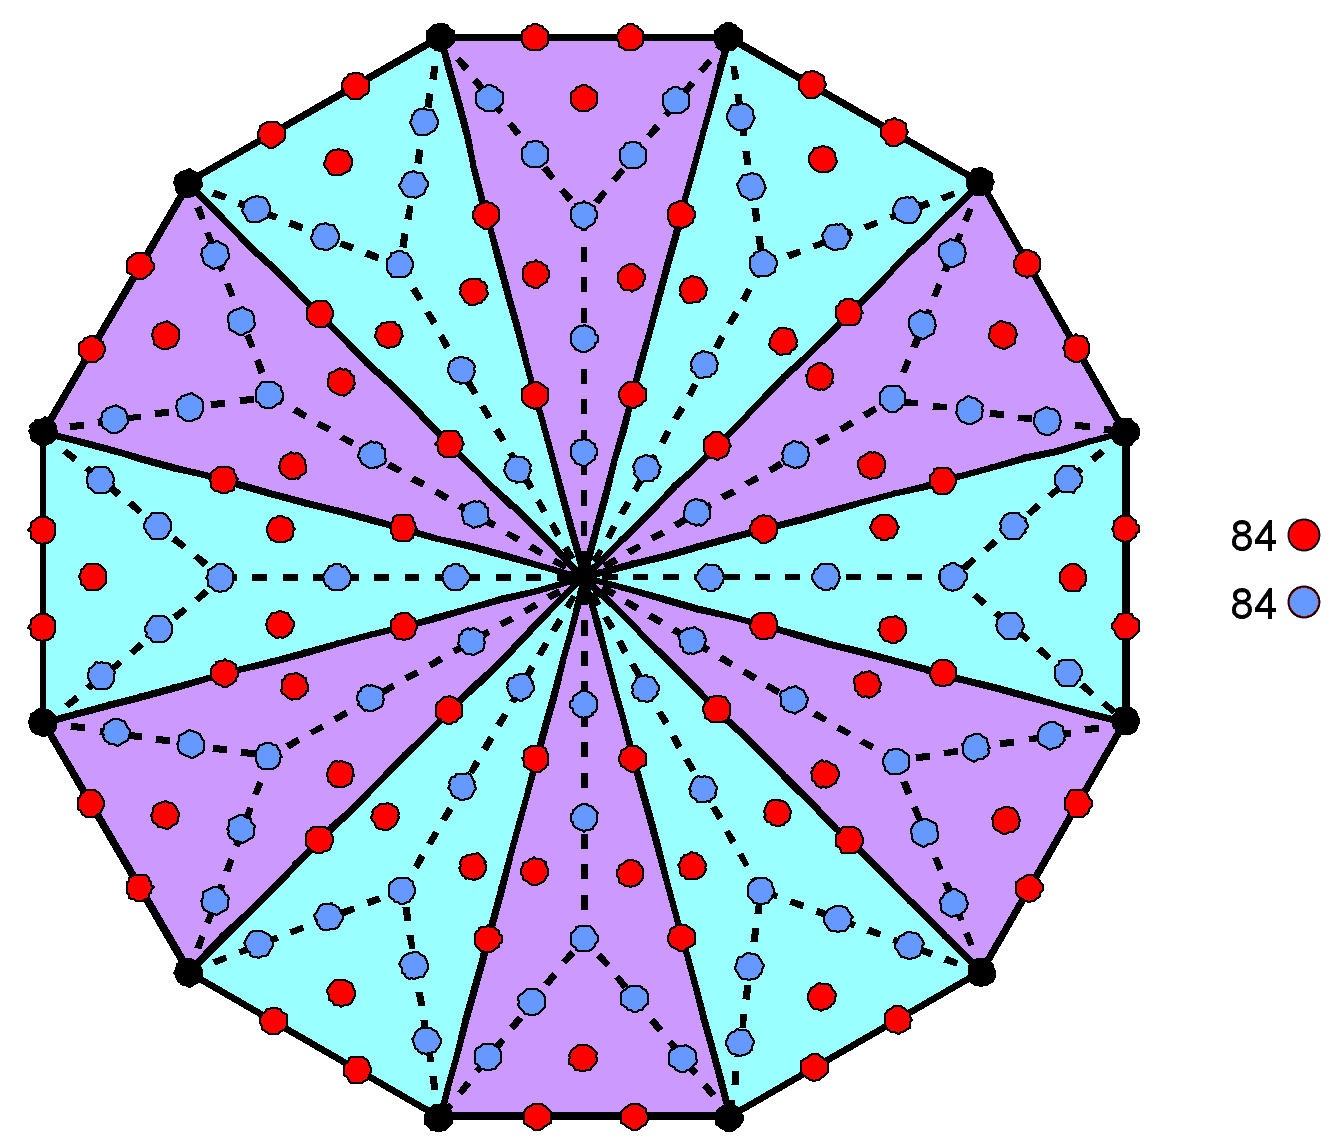 24 sets of 7 yods in dodecagon